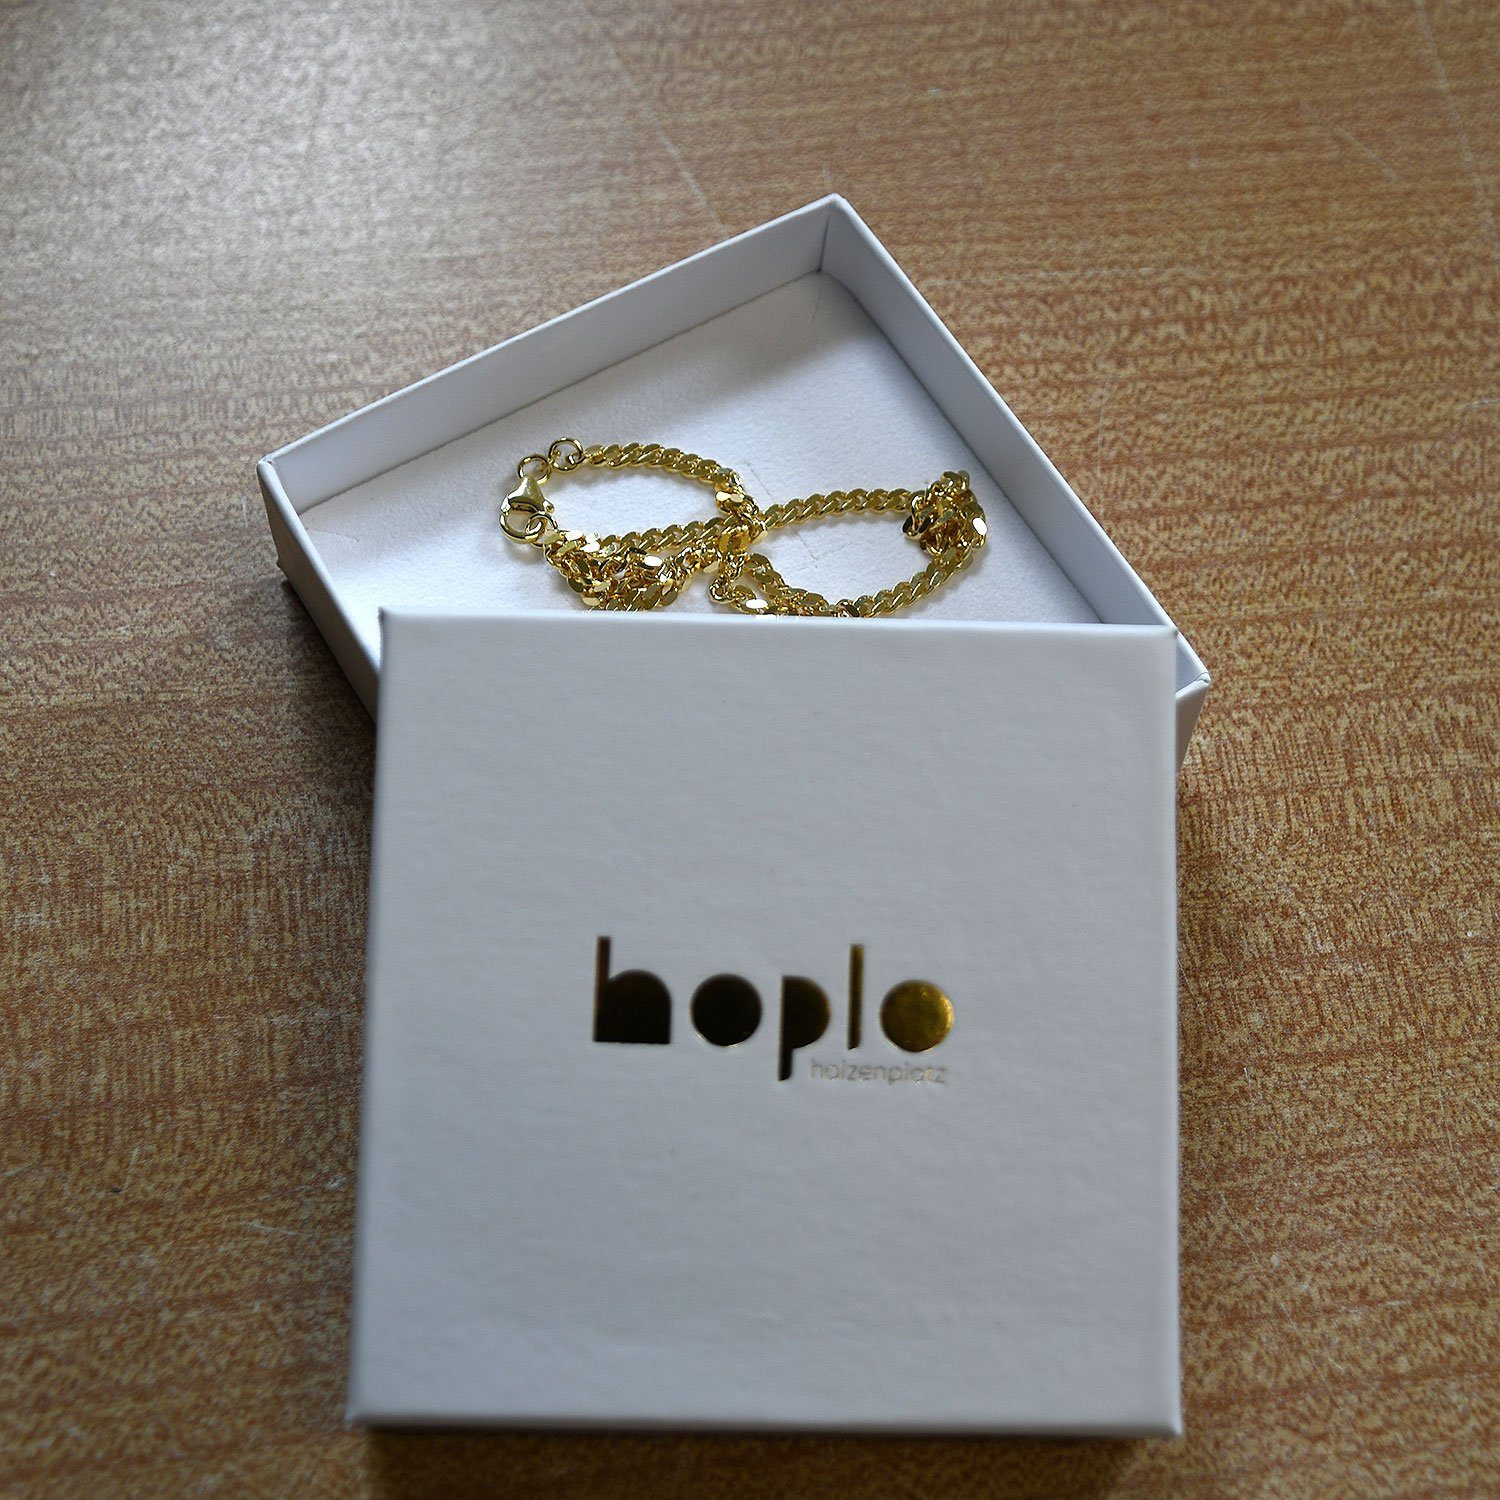 Goldkette, Made HOPLO in Germany